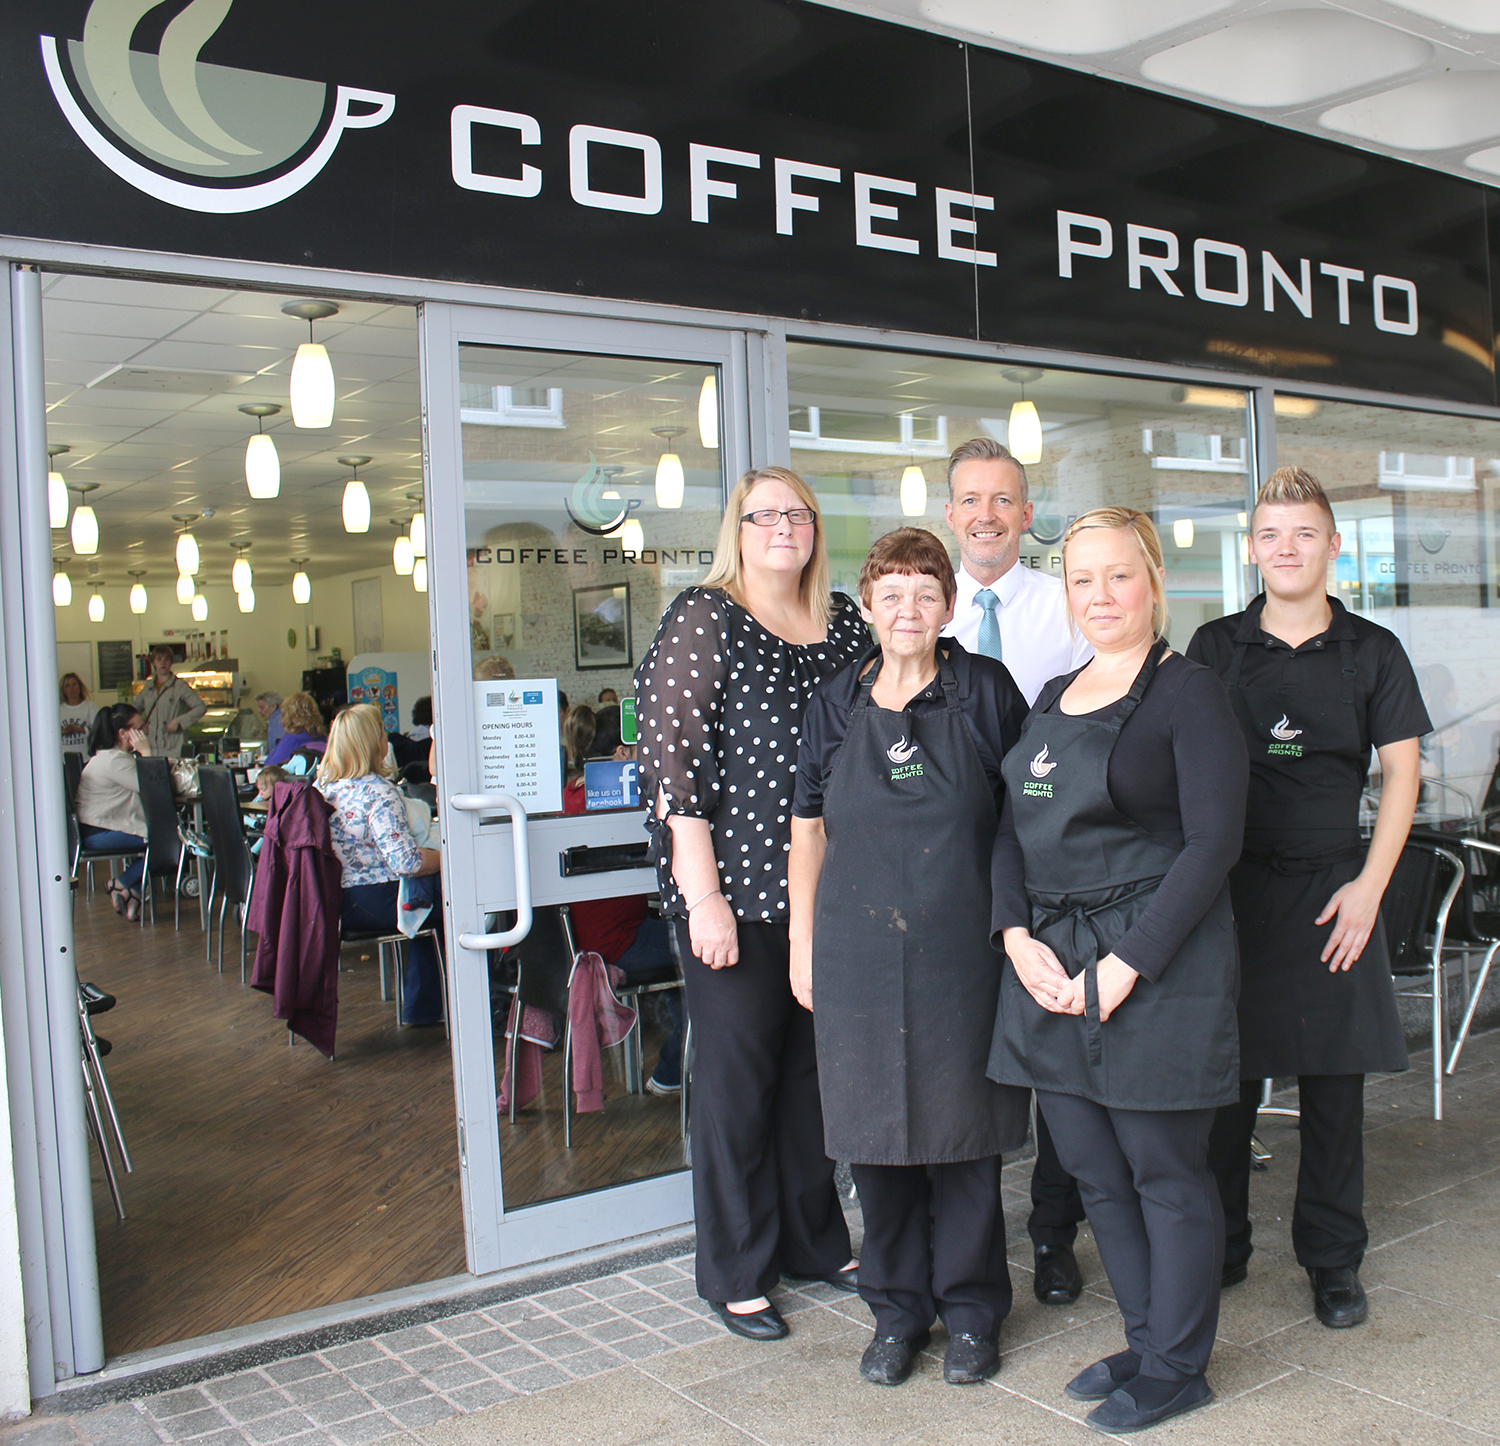 Coffee Pronto’s Special Service for Everyone